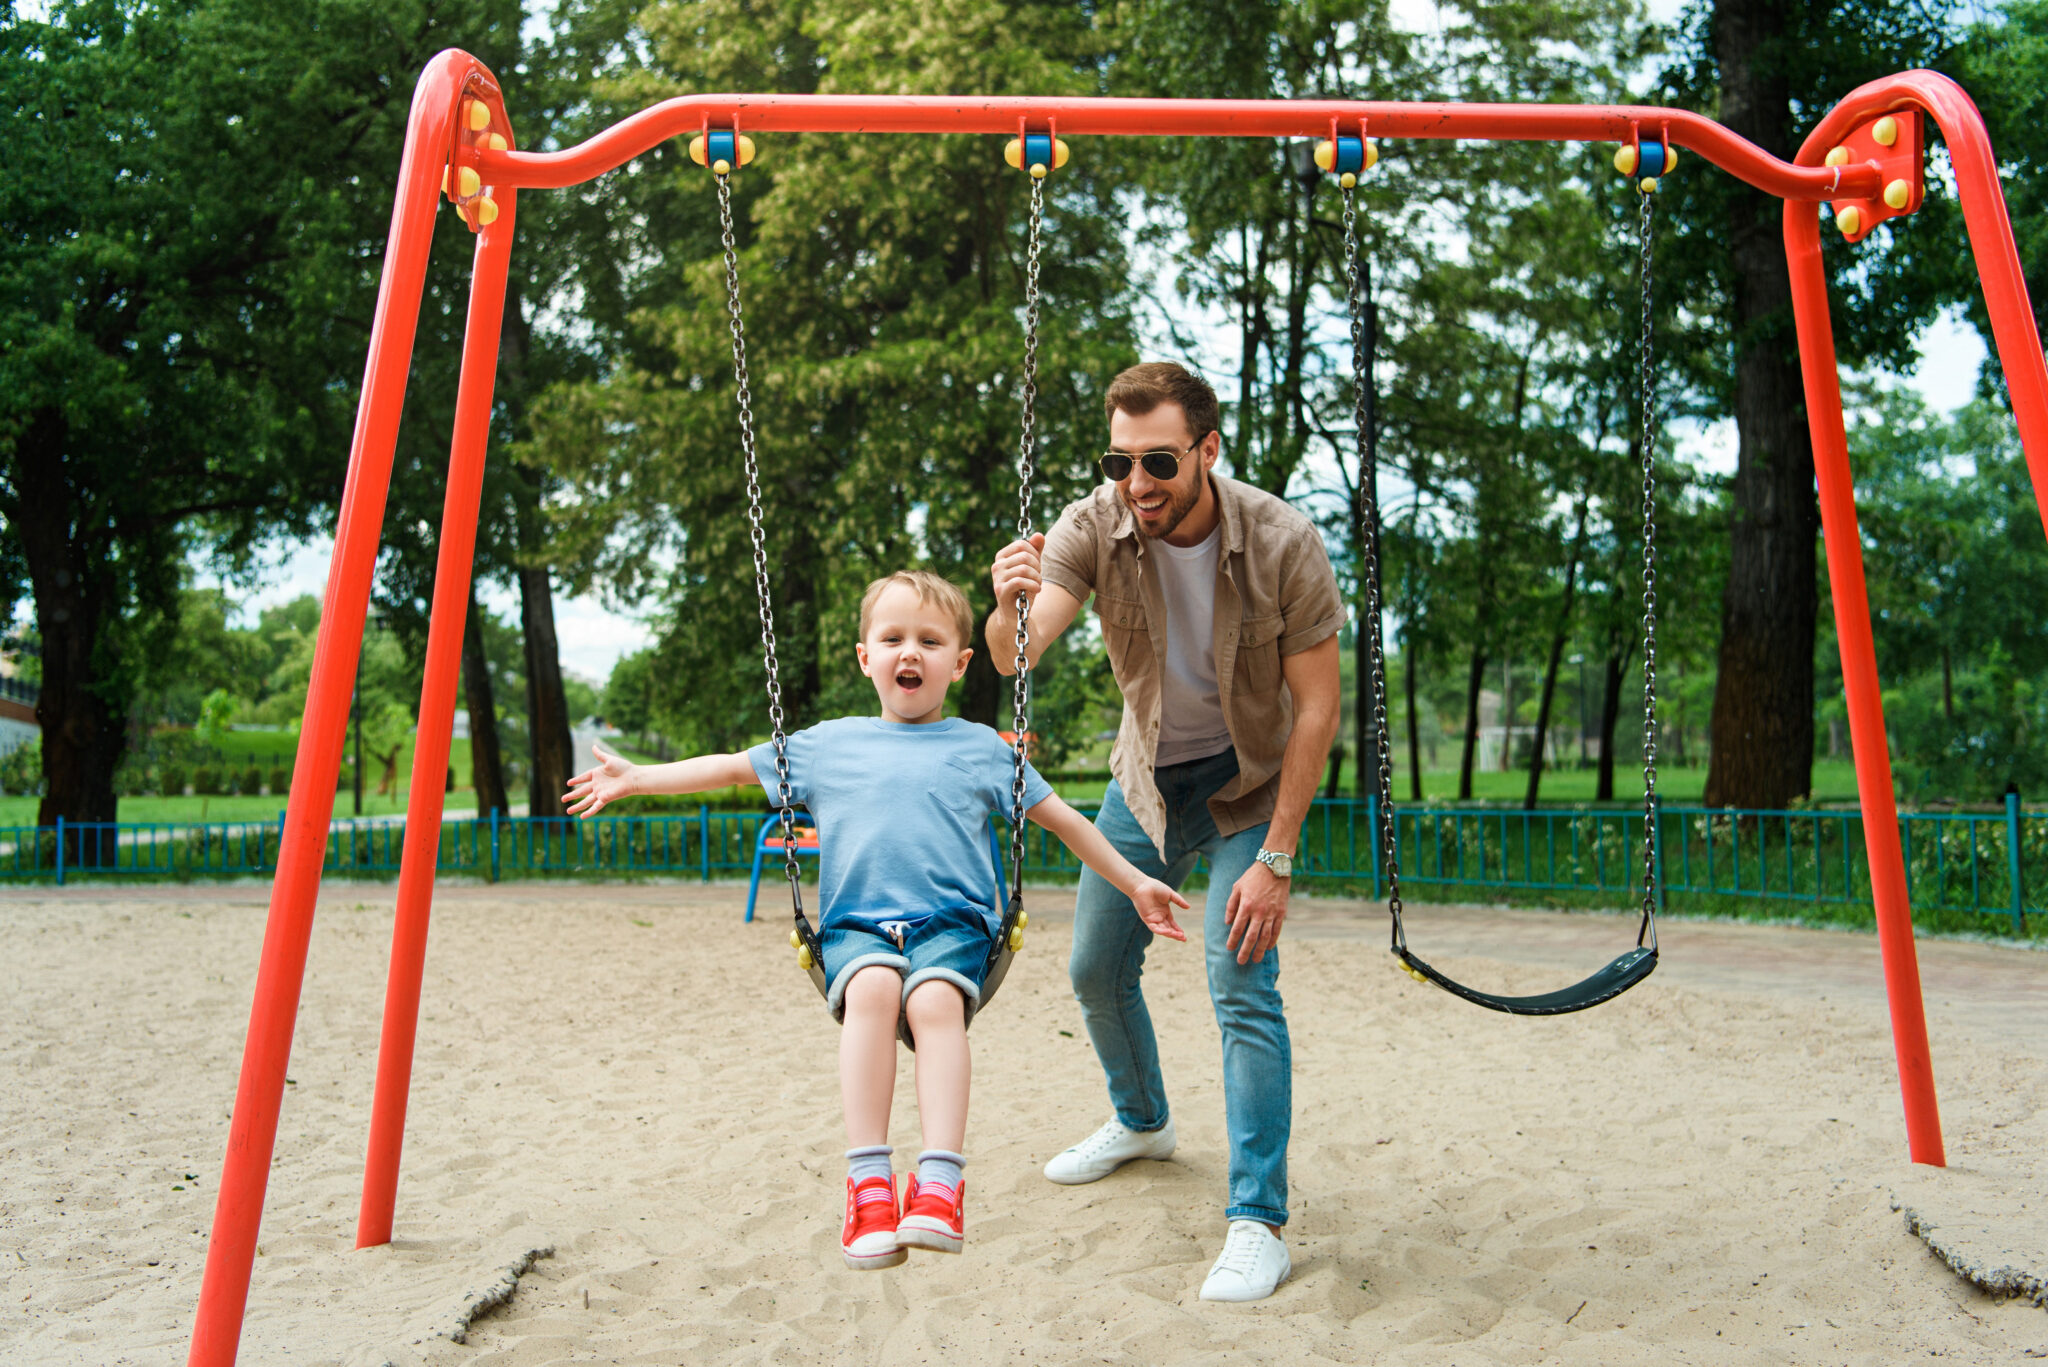 father and son having fun on swing at playground in park